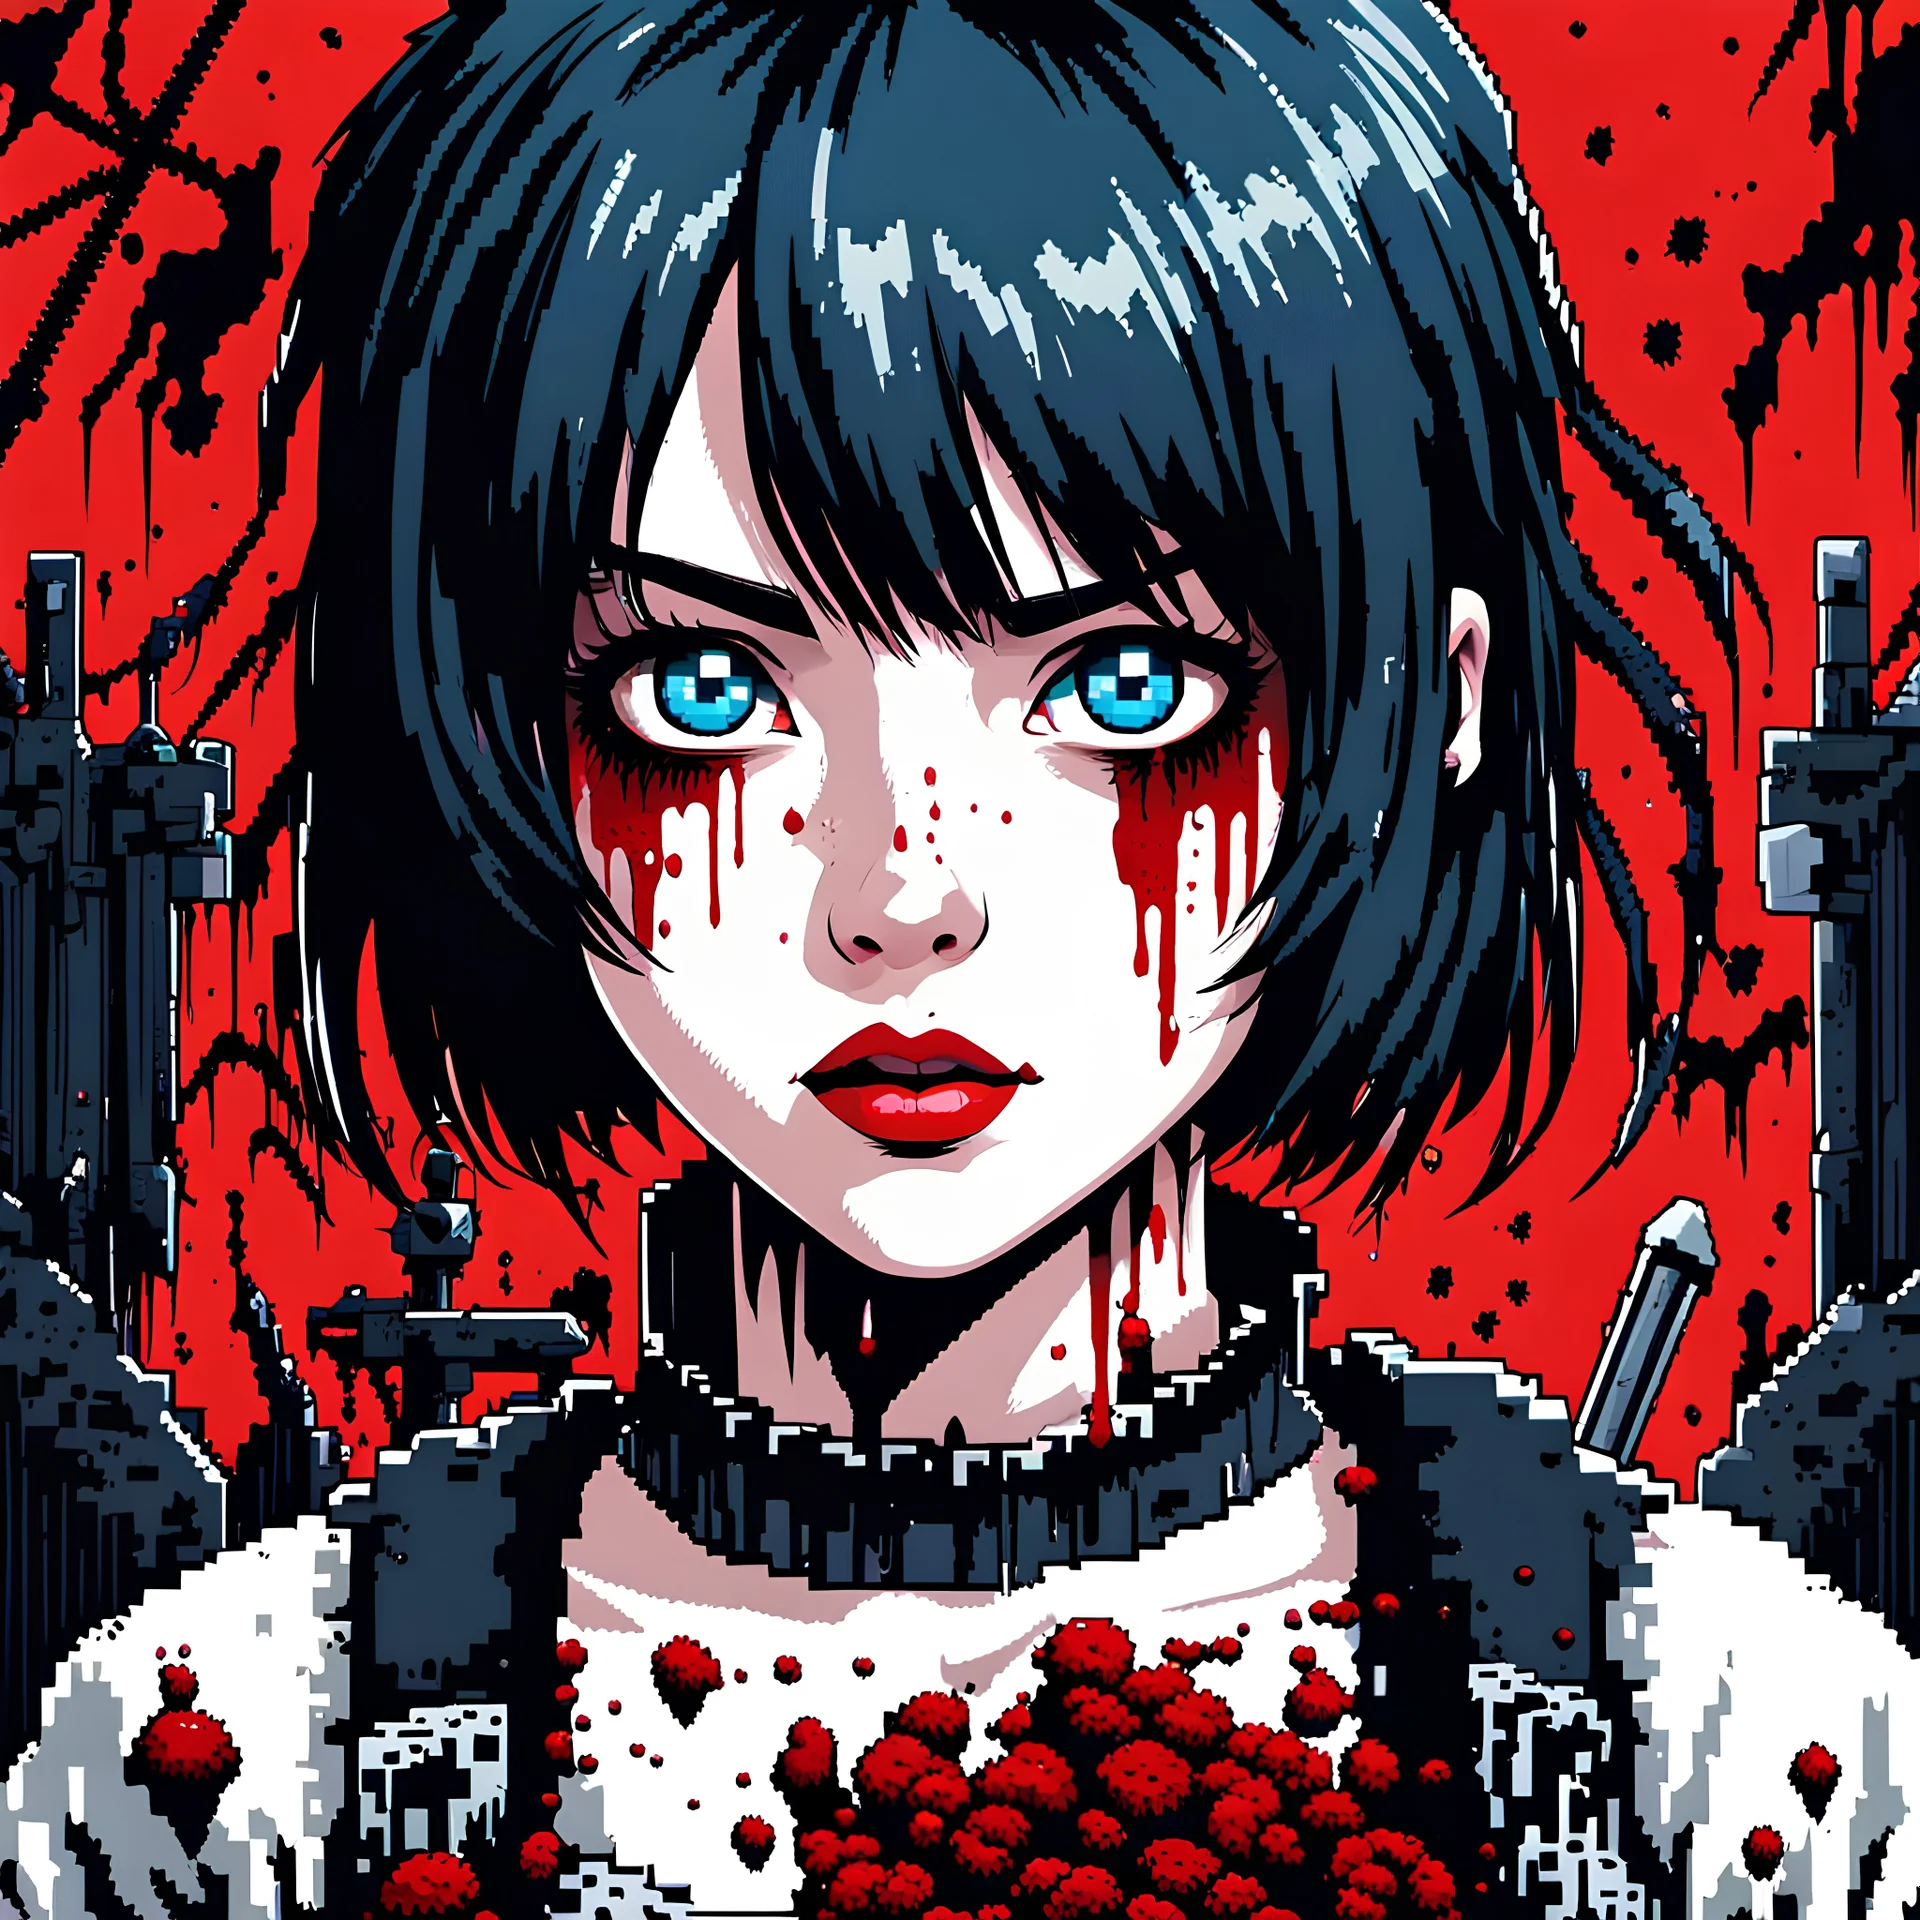 2dcg,ghouls,cute teenage girl with short hair and blue eyes,pixel art style,black and white color,B&W,gore,violence,white background,Extremely Violent Decapitation,dismemberment,disturbing,Monster,guts,morbid,mutilation,sacrifice,butchery,meathooks